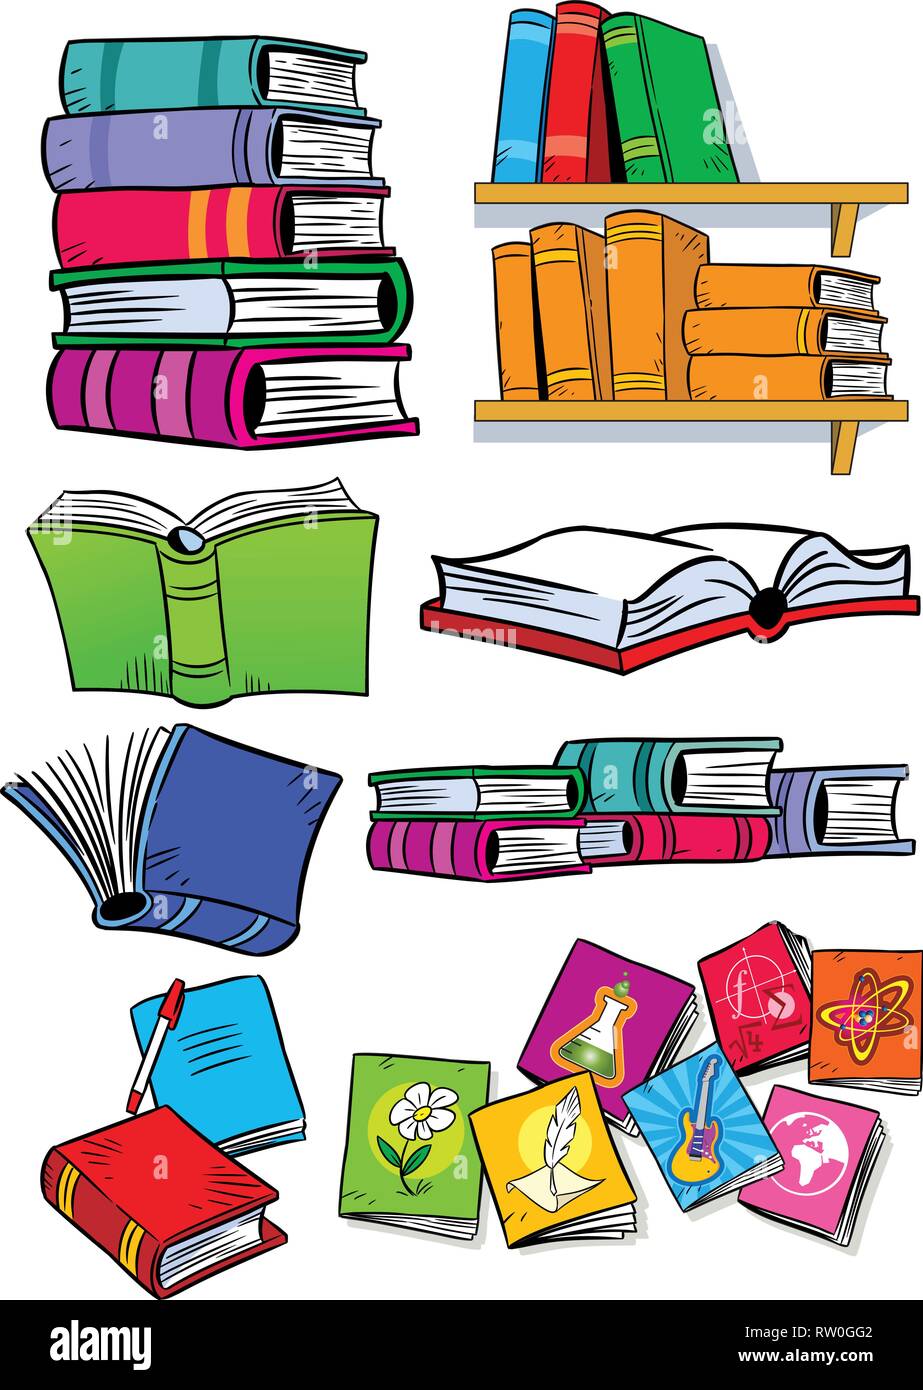 On vector illustration shows some types of books. Objects isolated on a white background, on separate layers, in a cartoon style. Stock Vector